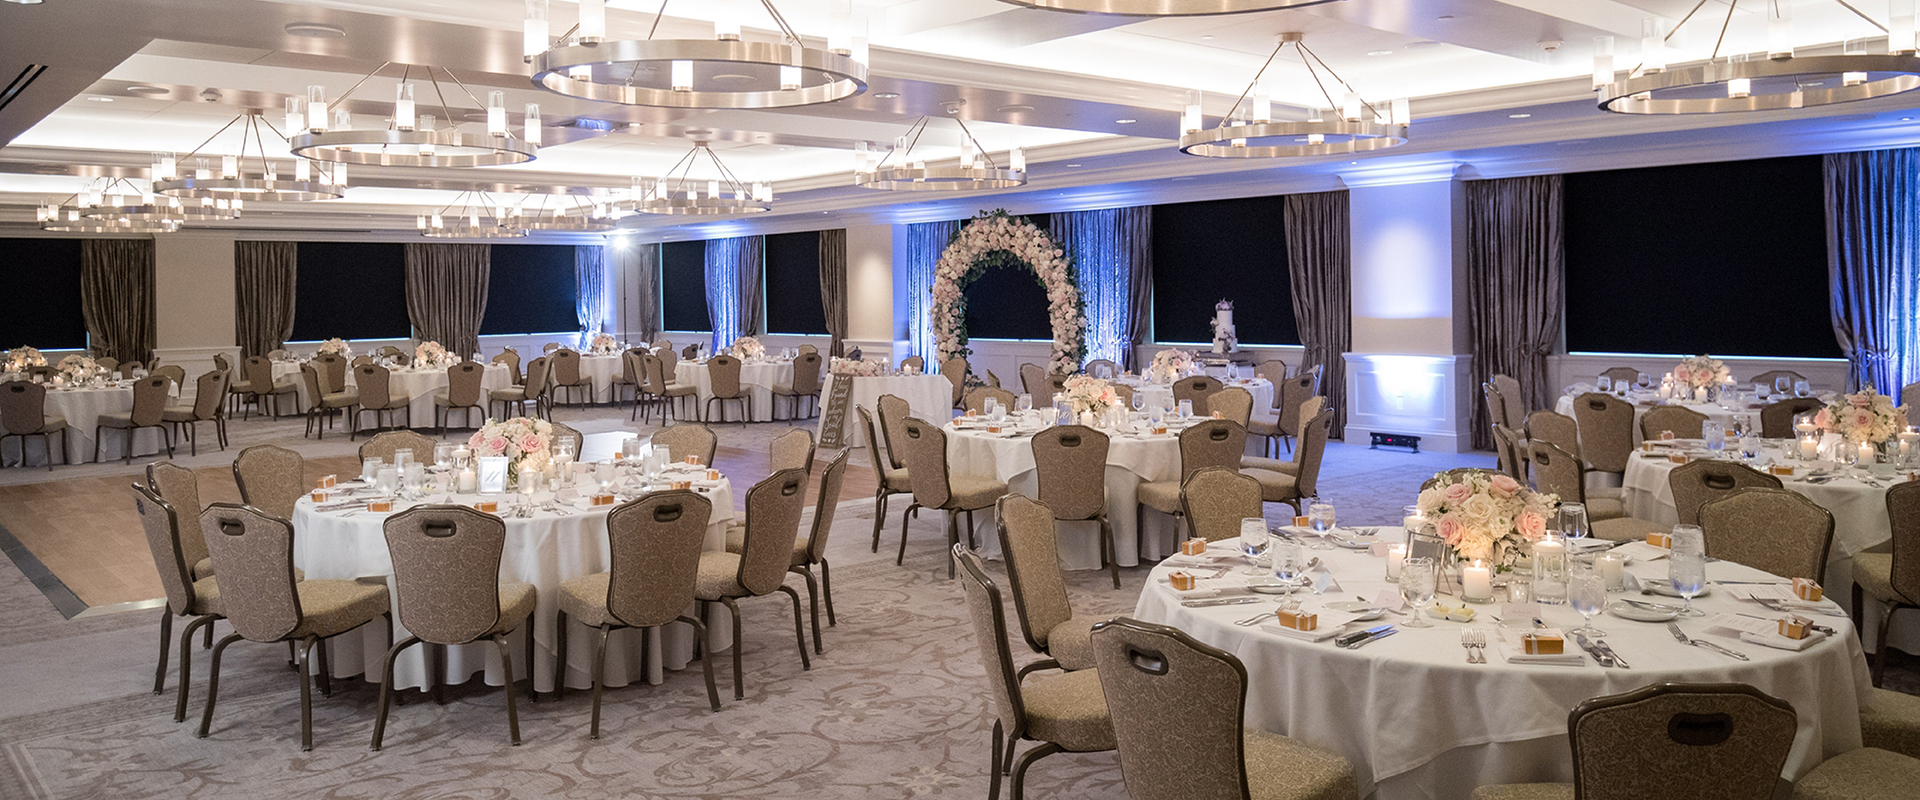 A room in cream, beige, and white with round tables, a dance floor, chandeliers, and windows